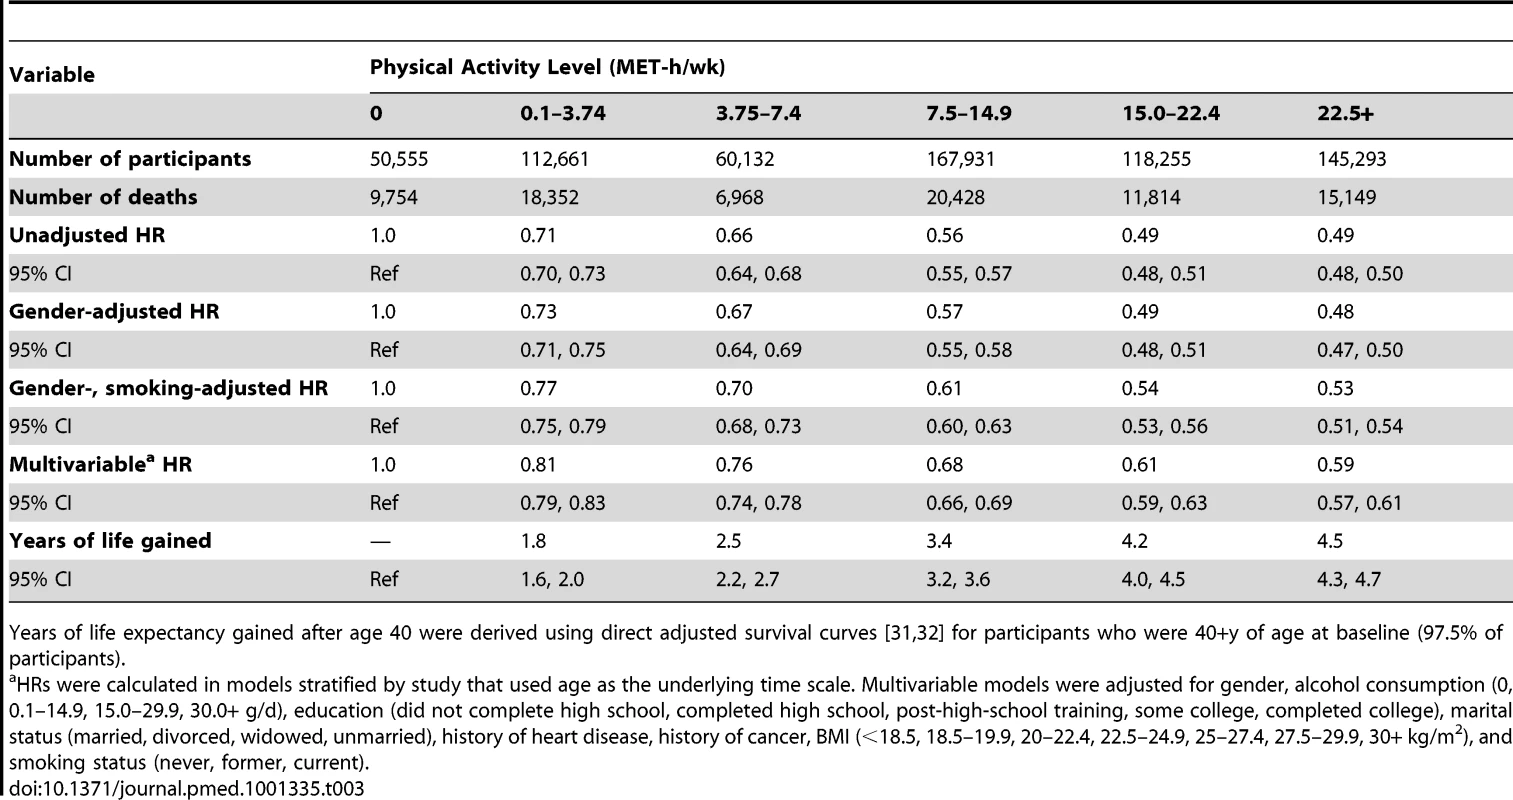 Leisure time physical activity and hazard ratio of mortality and years of life gained after age 40.